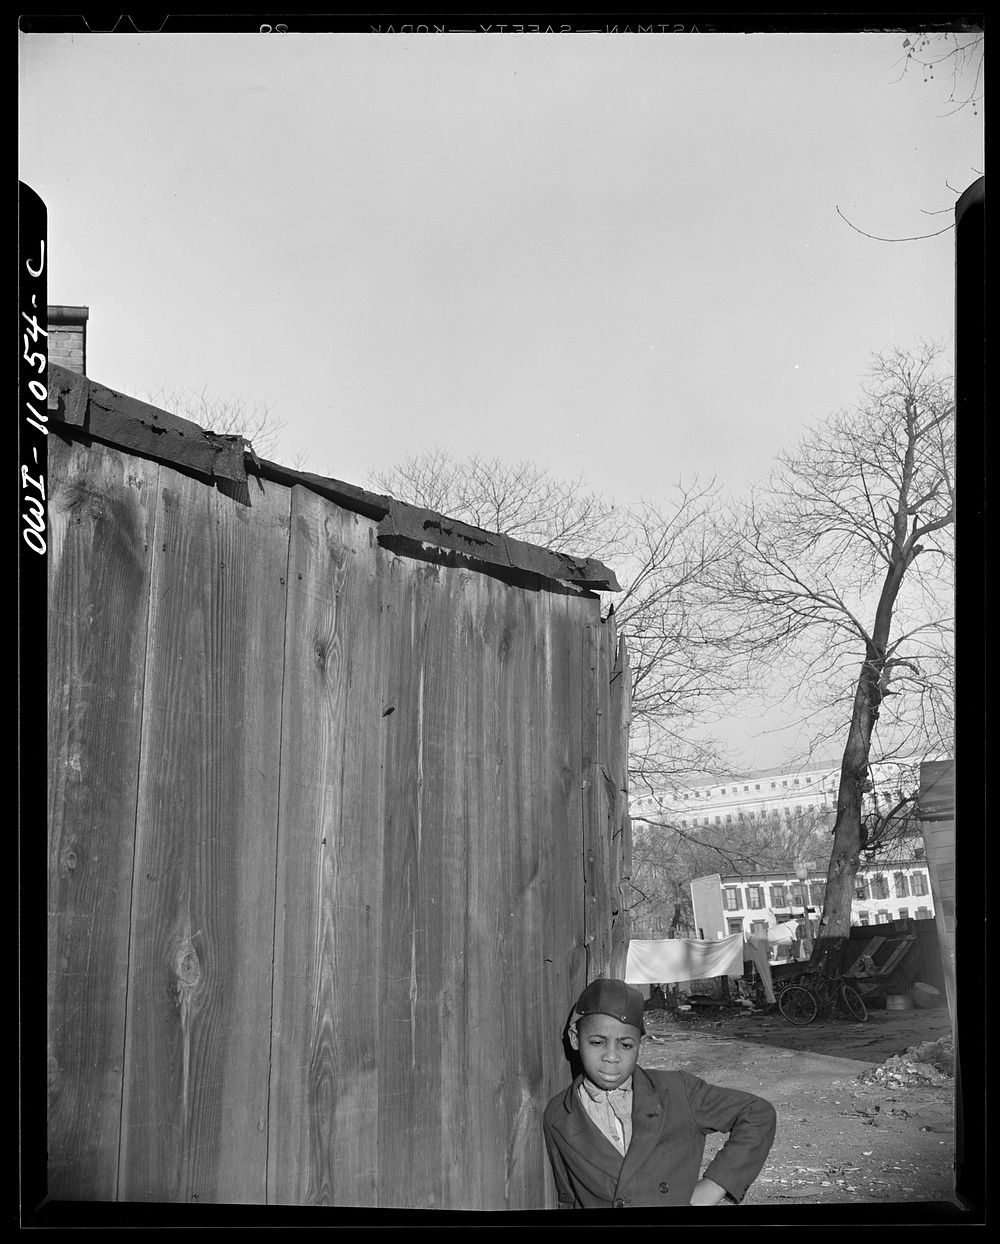 Washington (southwest section), D.C.  boy. Sourced from the Library of Congress.